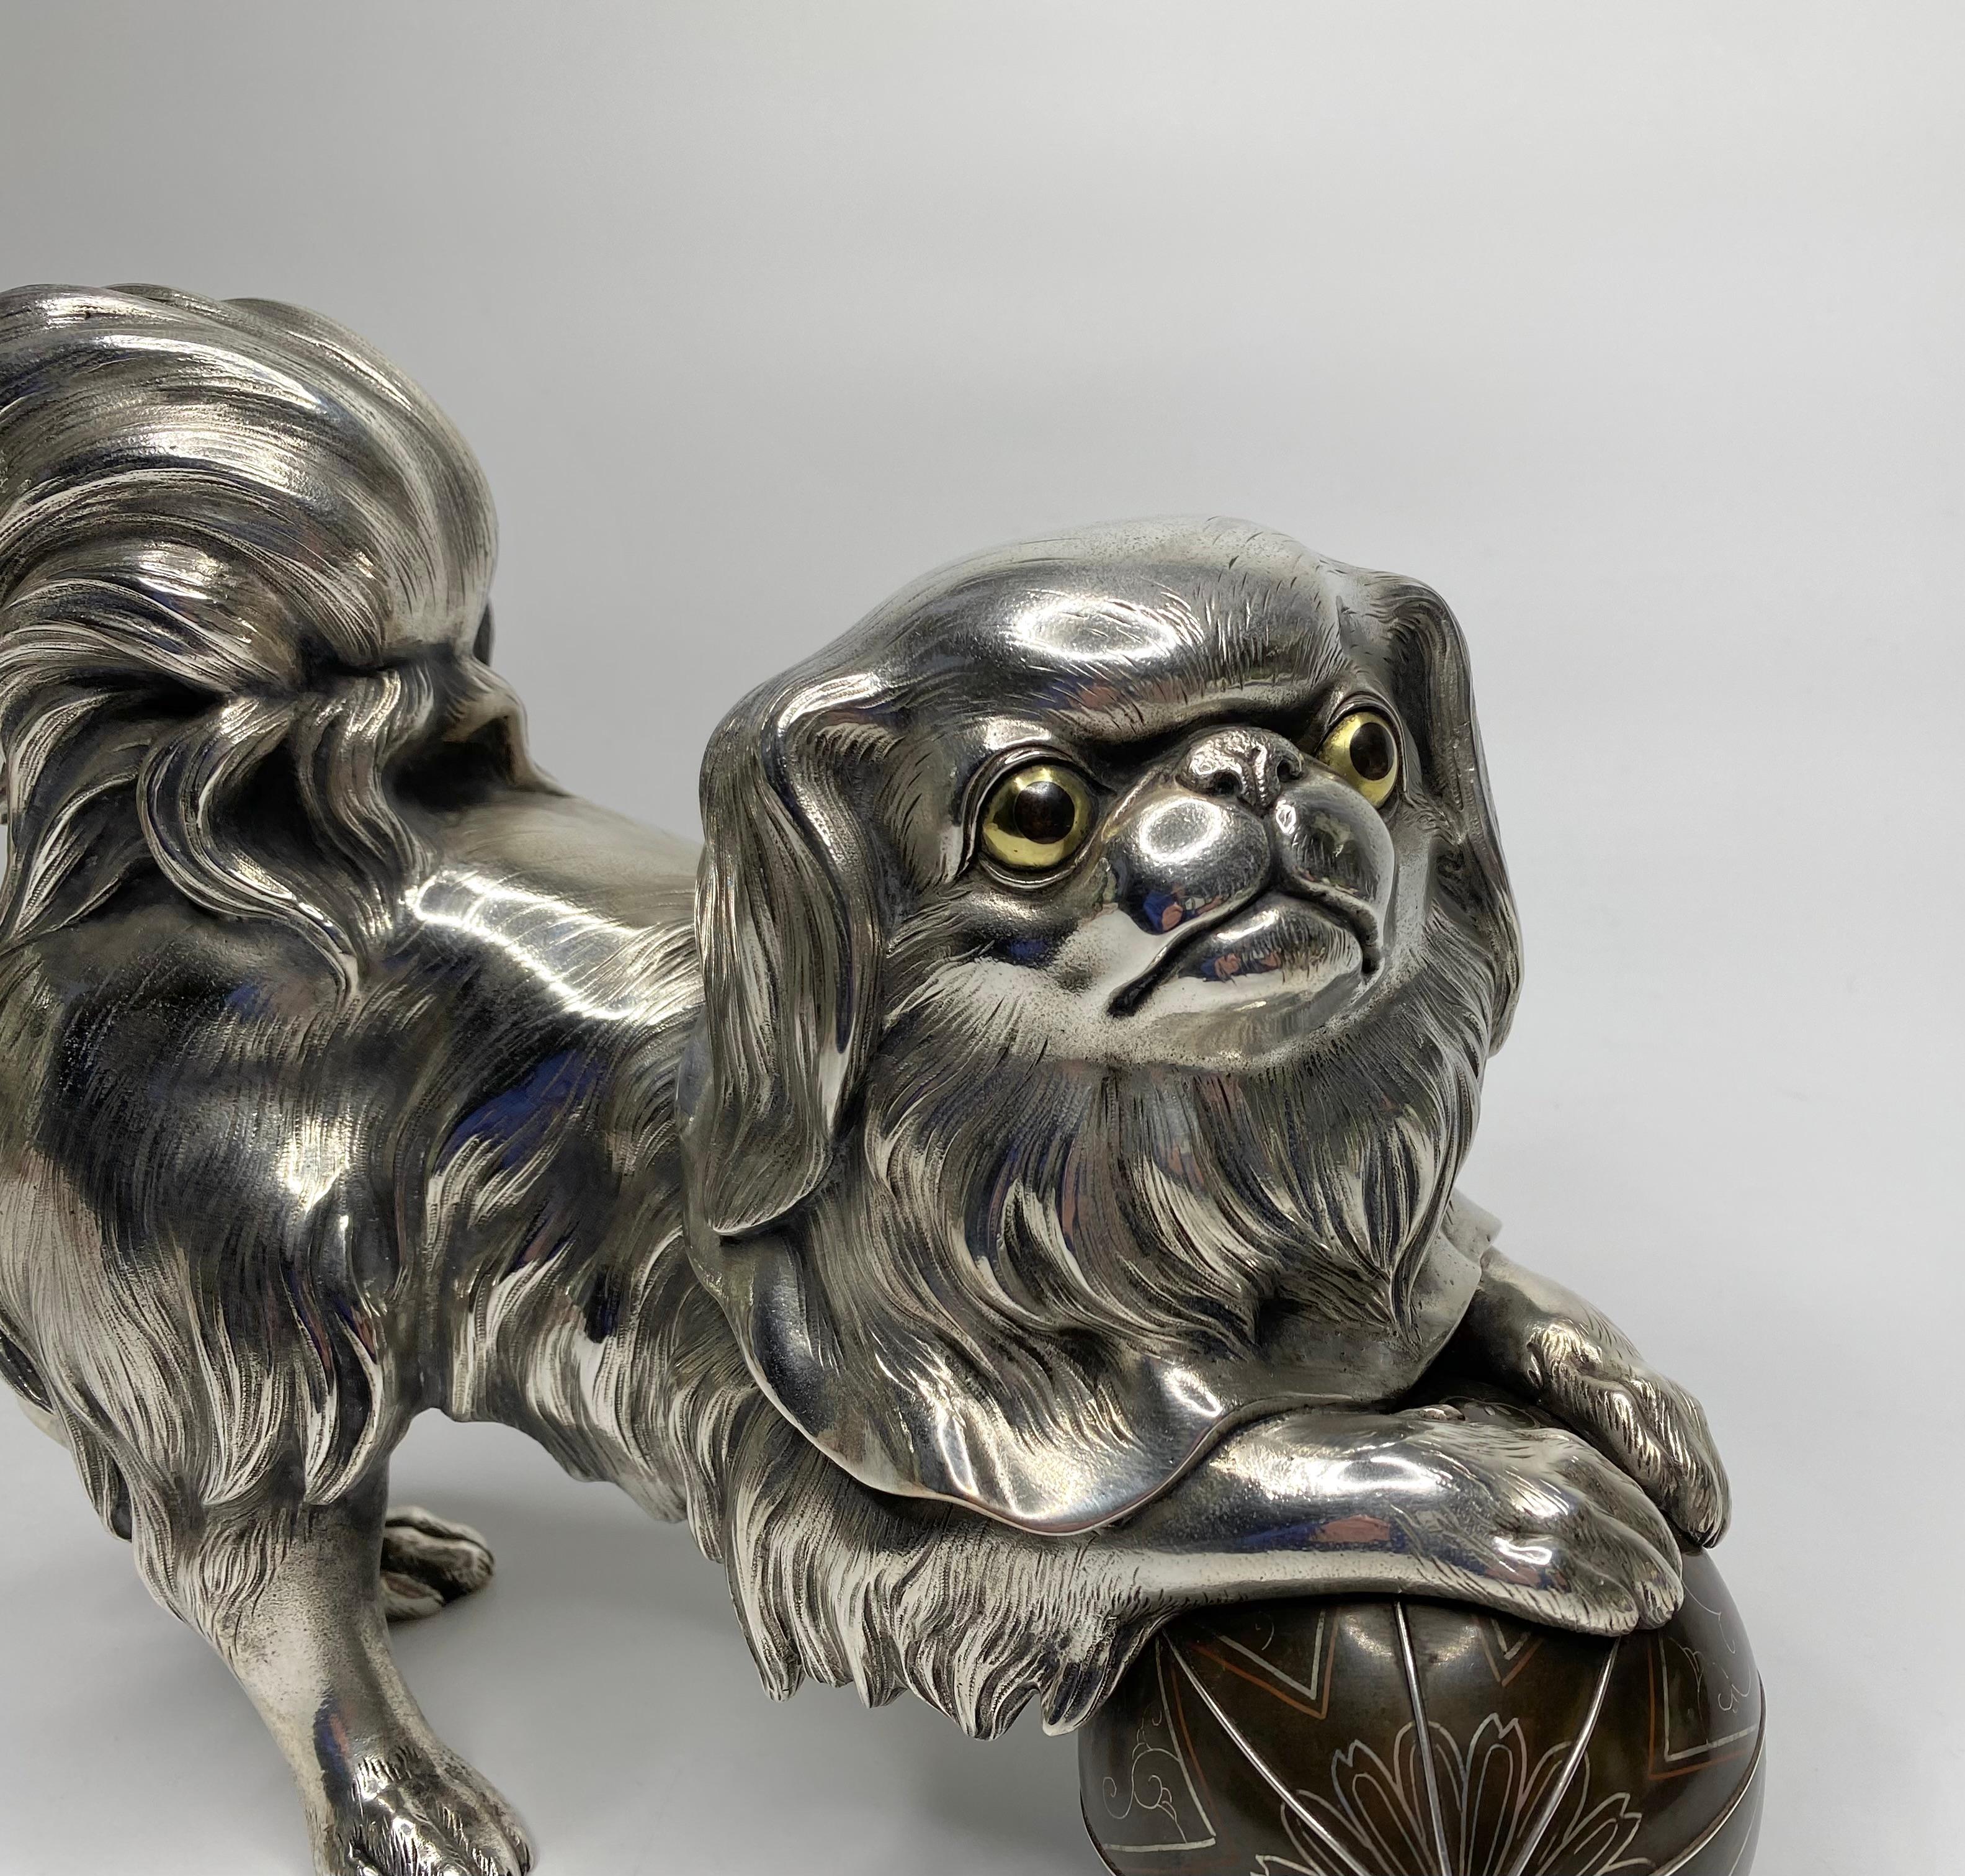 Silvered bronze okimono of a Chin puppy, Japan, Meiji Period.

£8,900.00
A large, and heavy Japanese silvered bronze okimono, c. 1890, Meiji Period. Finely modelled as a Japanese Chin puppy, with his paws resting upon a ball.
The playful dog